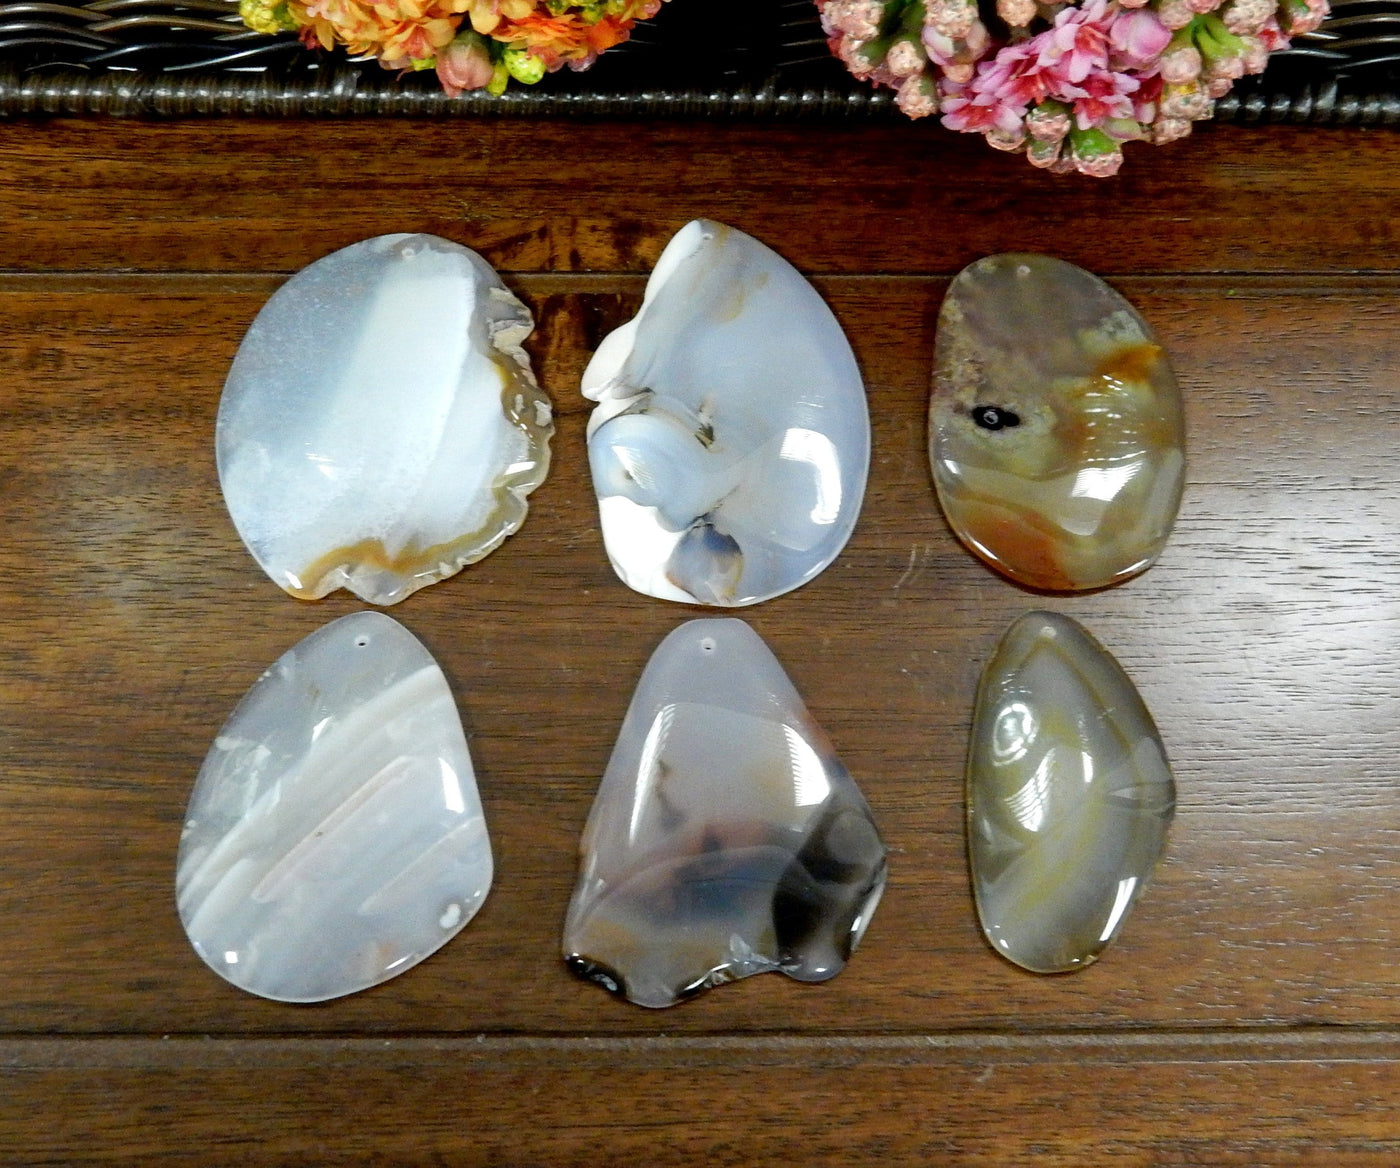 6 Natural FreeForm Agate Slices with Polished Edge on Wooden Background.